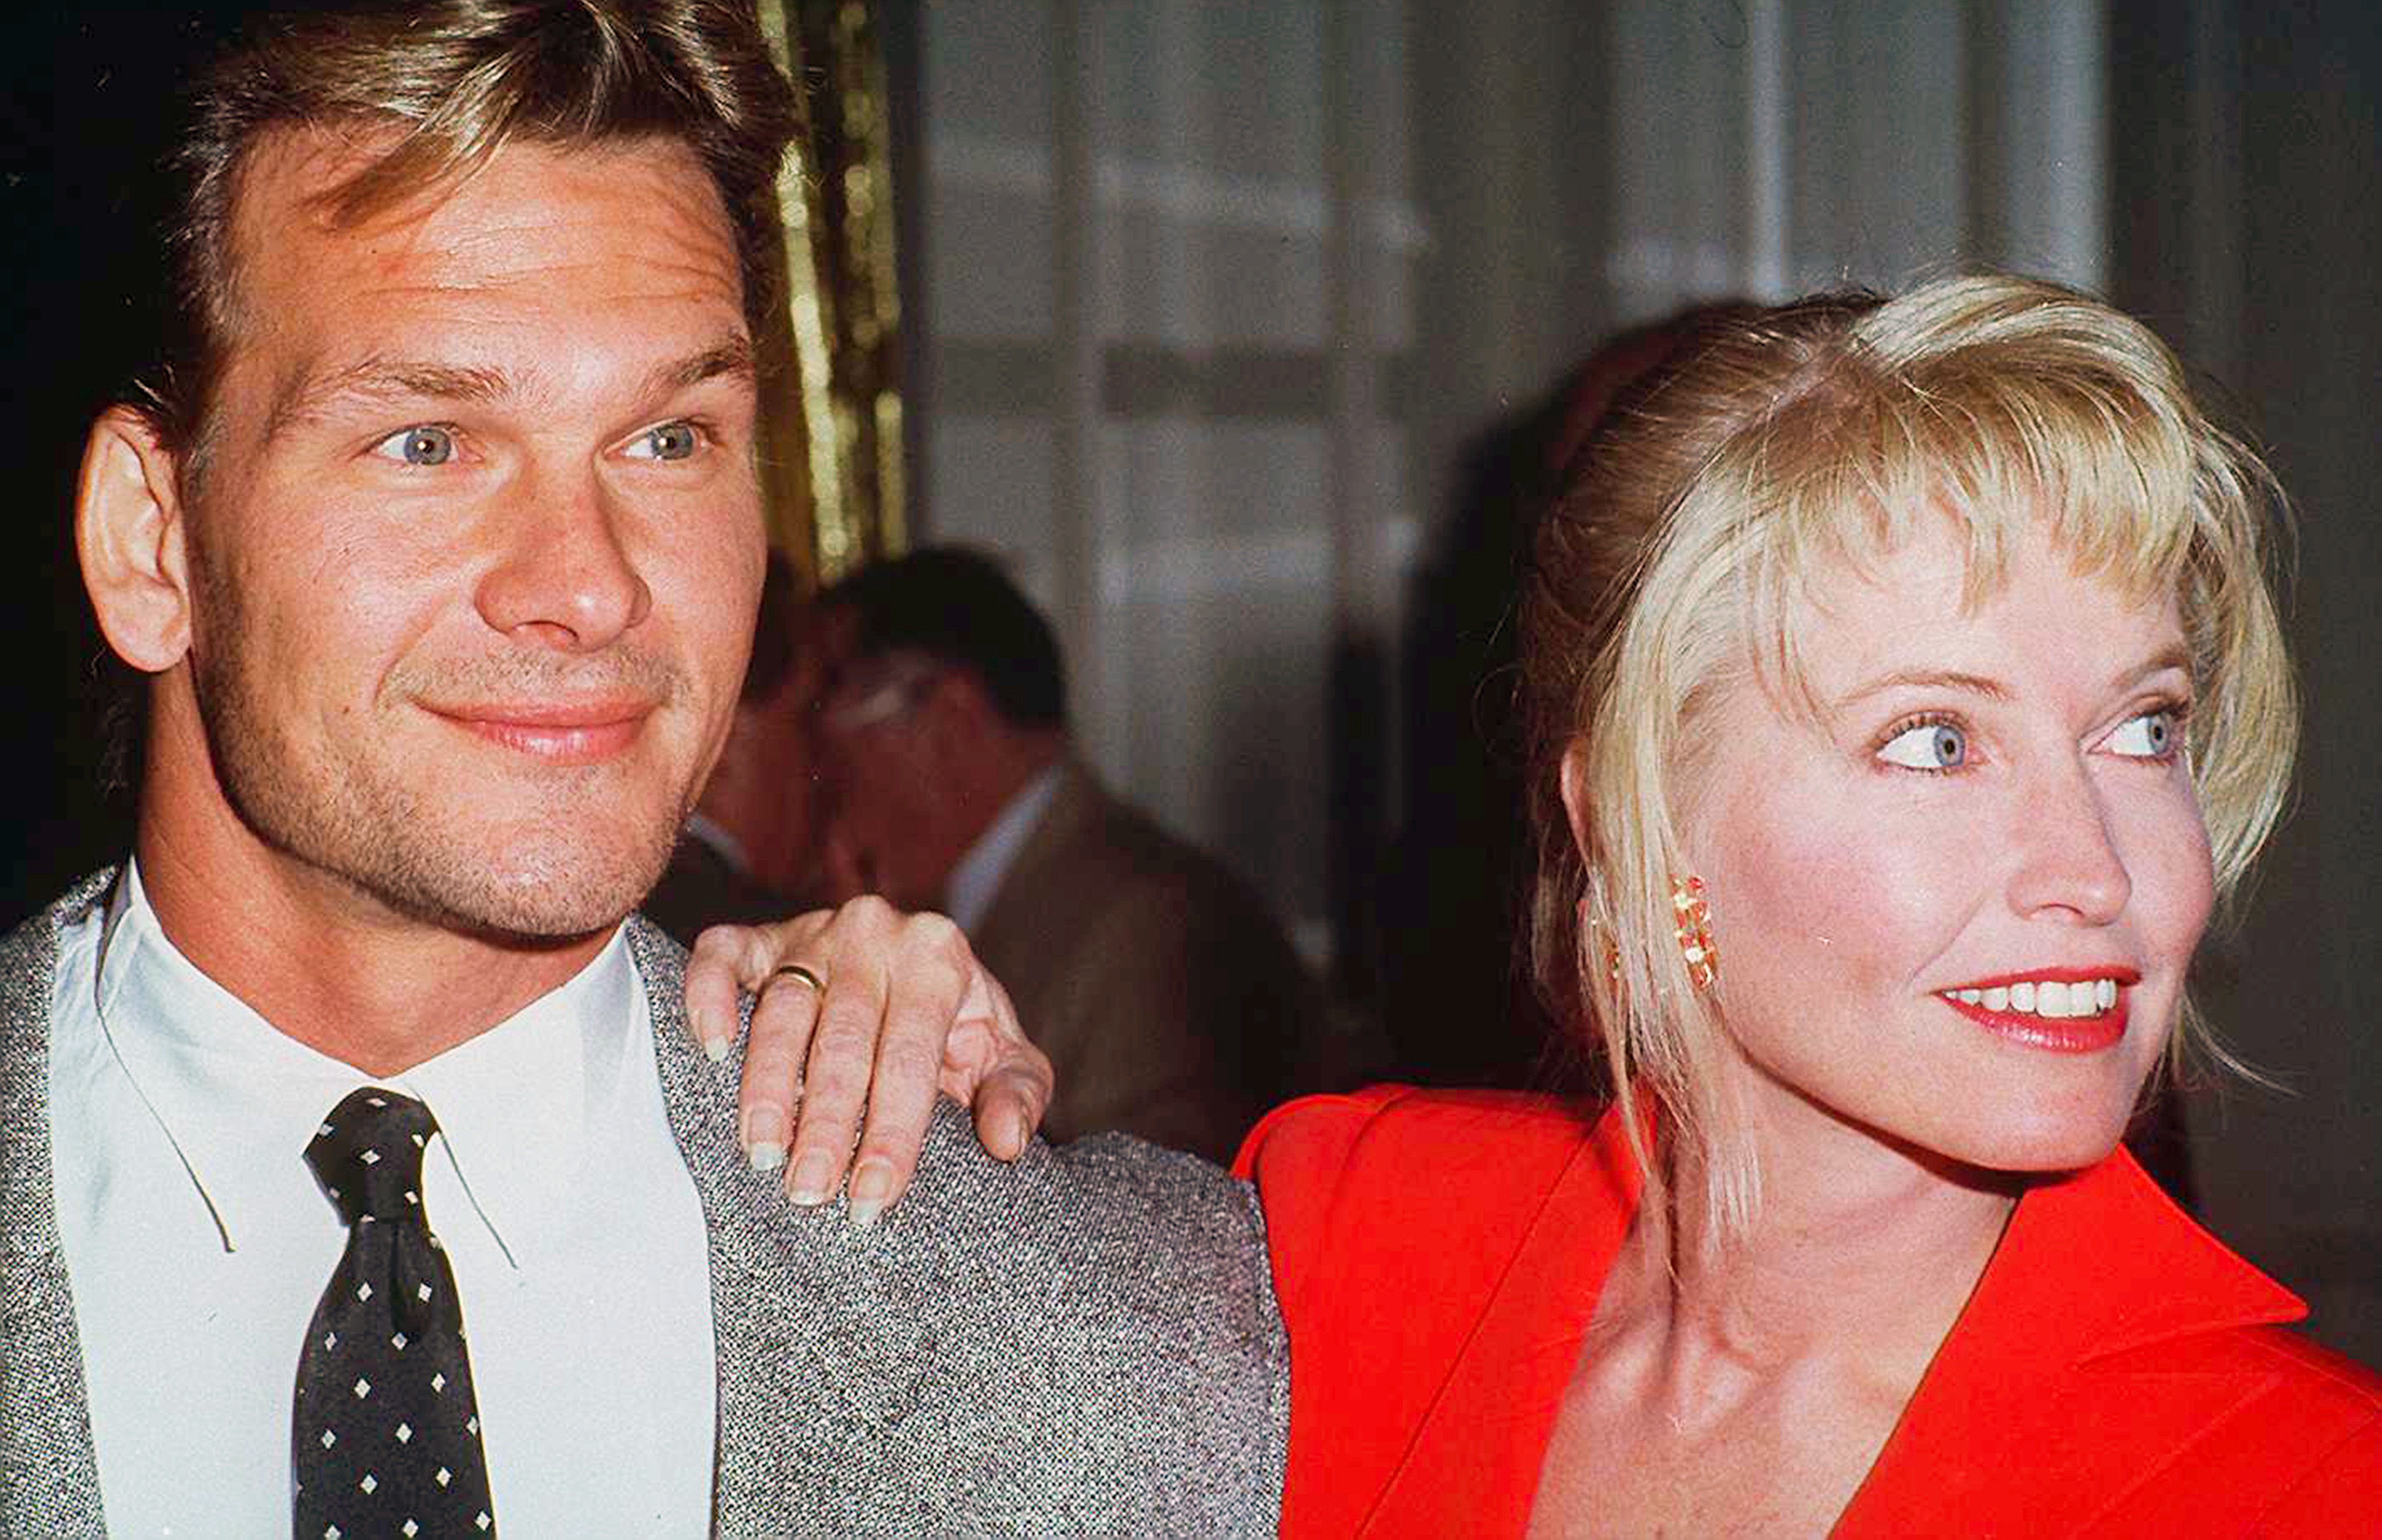 American actor and dancer Patrick Swayze (1952 - 2009) with his wife Lisa Niemi, circa 1992 | Source: Getty Images